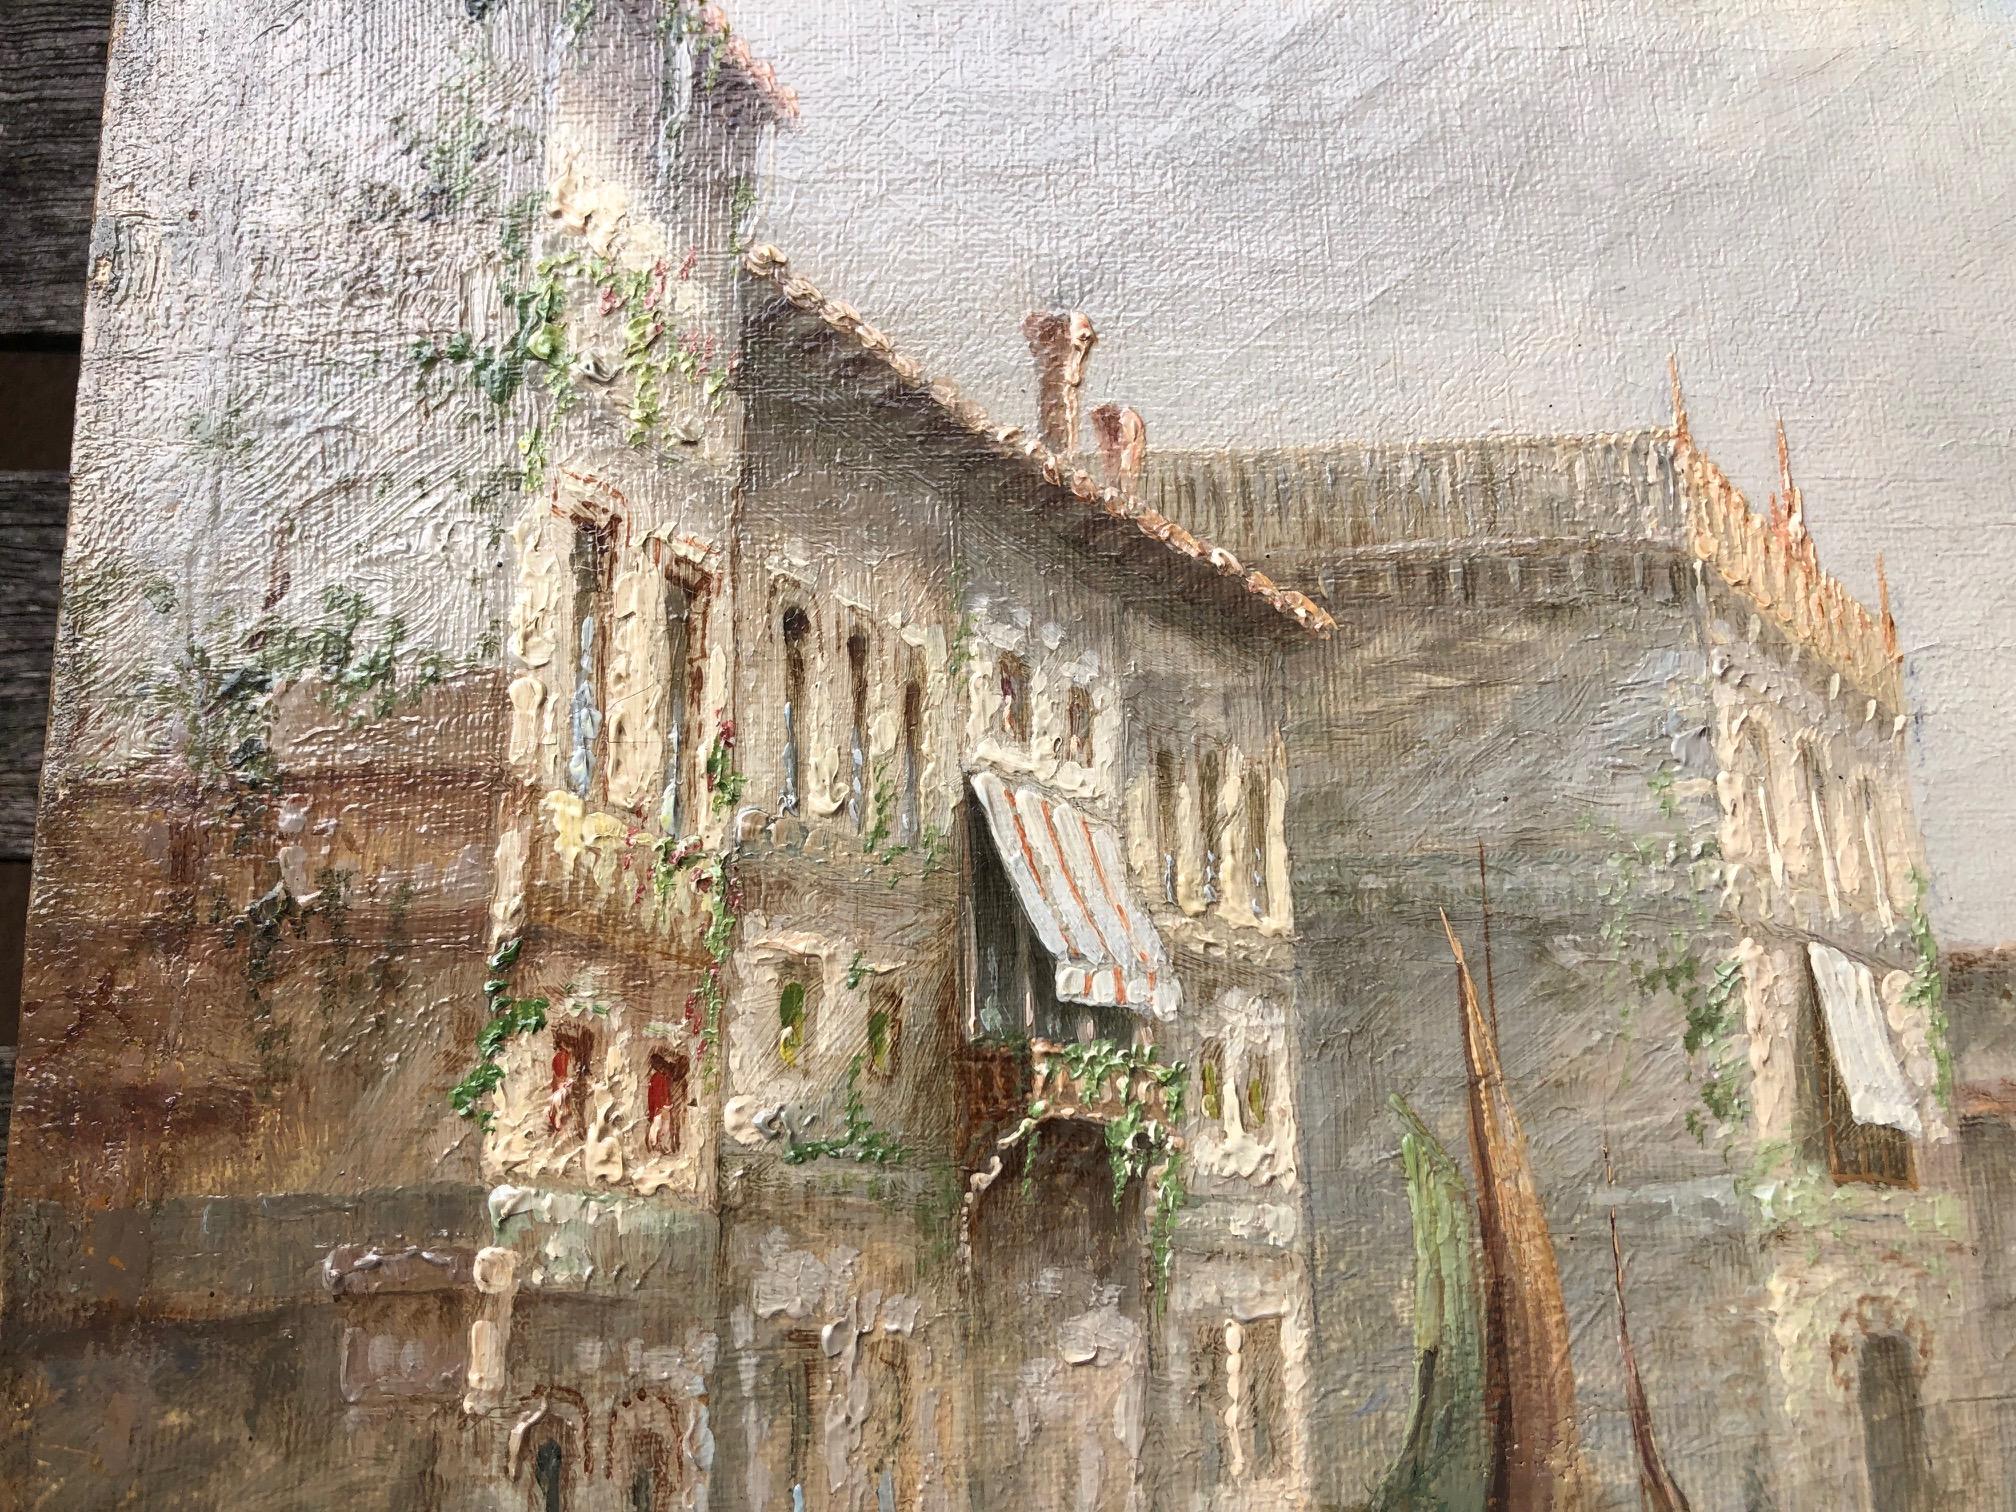 James Salt
British 1850 - 1903
James Salt was a 19th Century British Painter known almost exclusively for his romantic depictions of Venice.  This enchanting oil on canvas painting is a 'Venetian Capriccio' and is signed; James Salt in his stylized